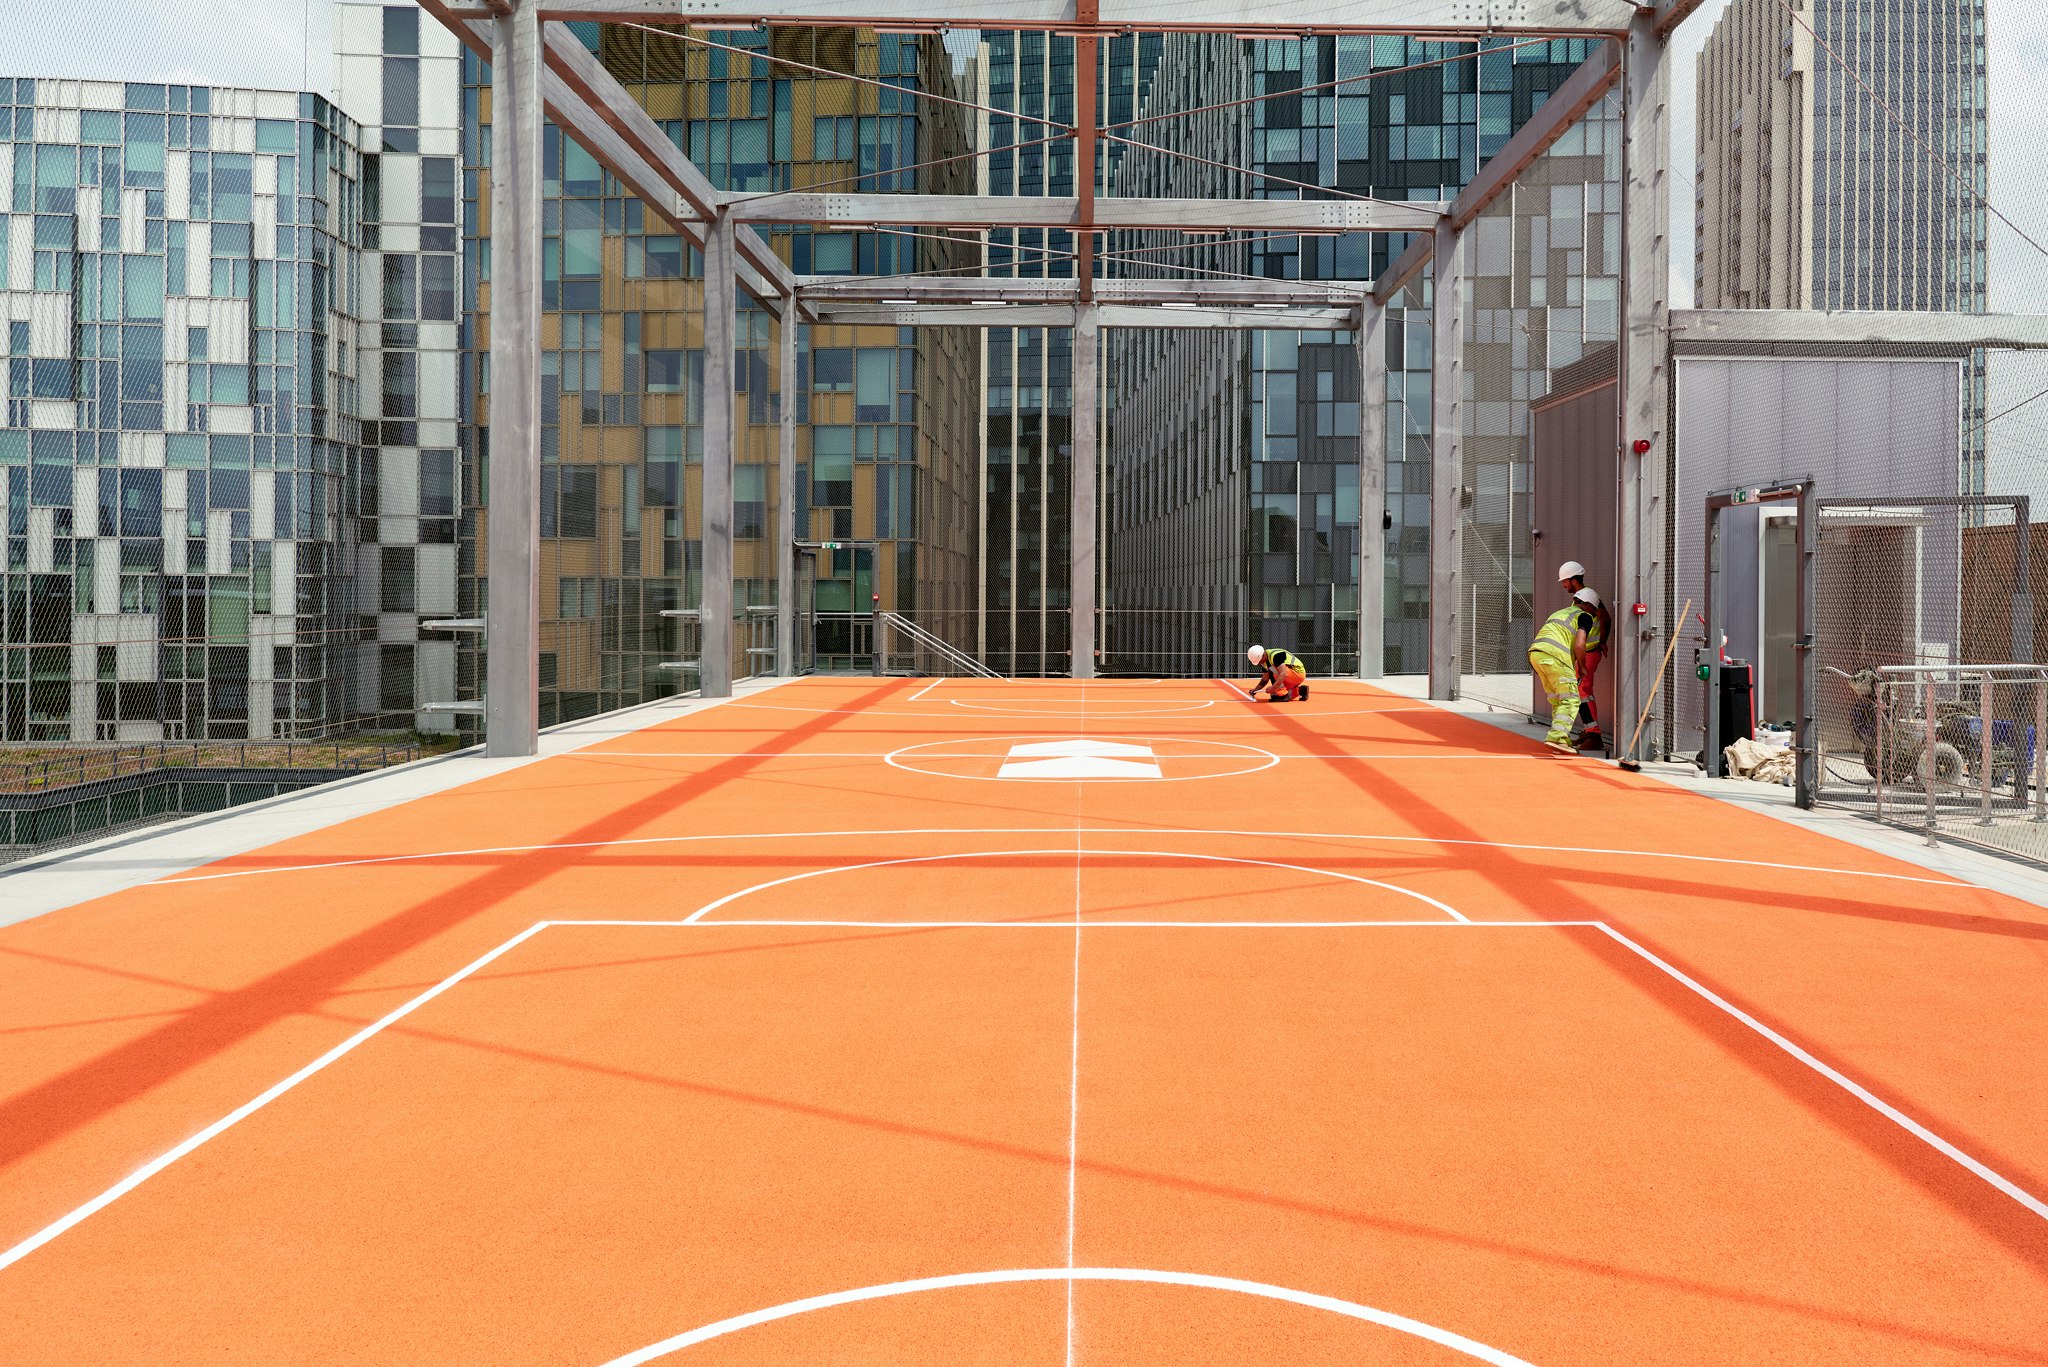 Rooftop Basketball Court - The Court image 3